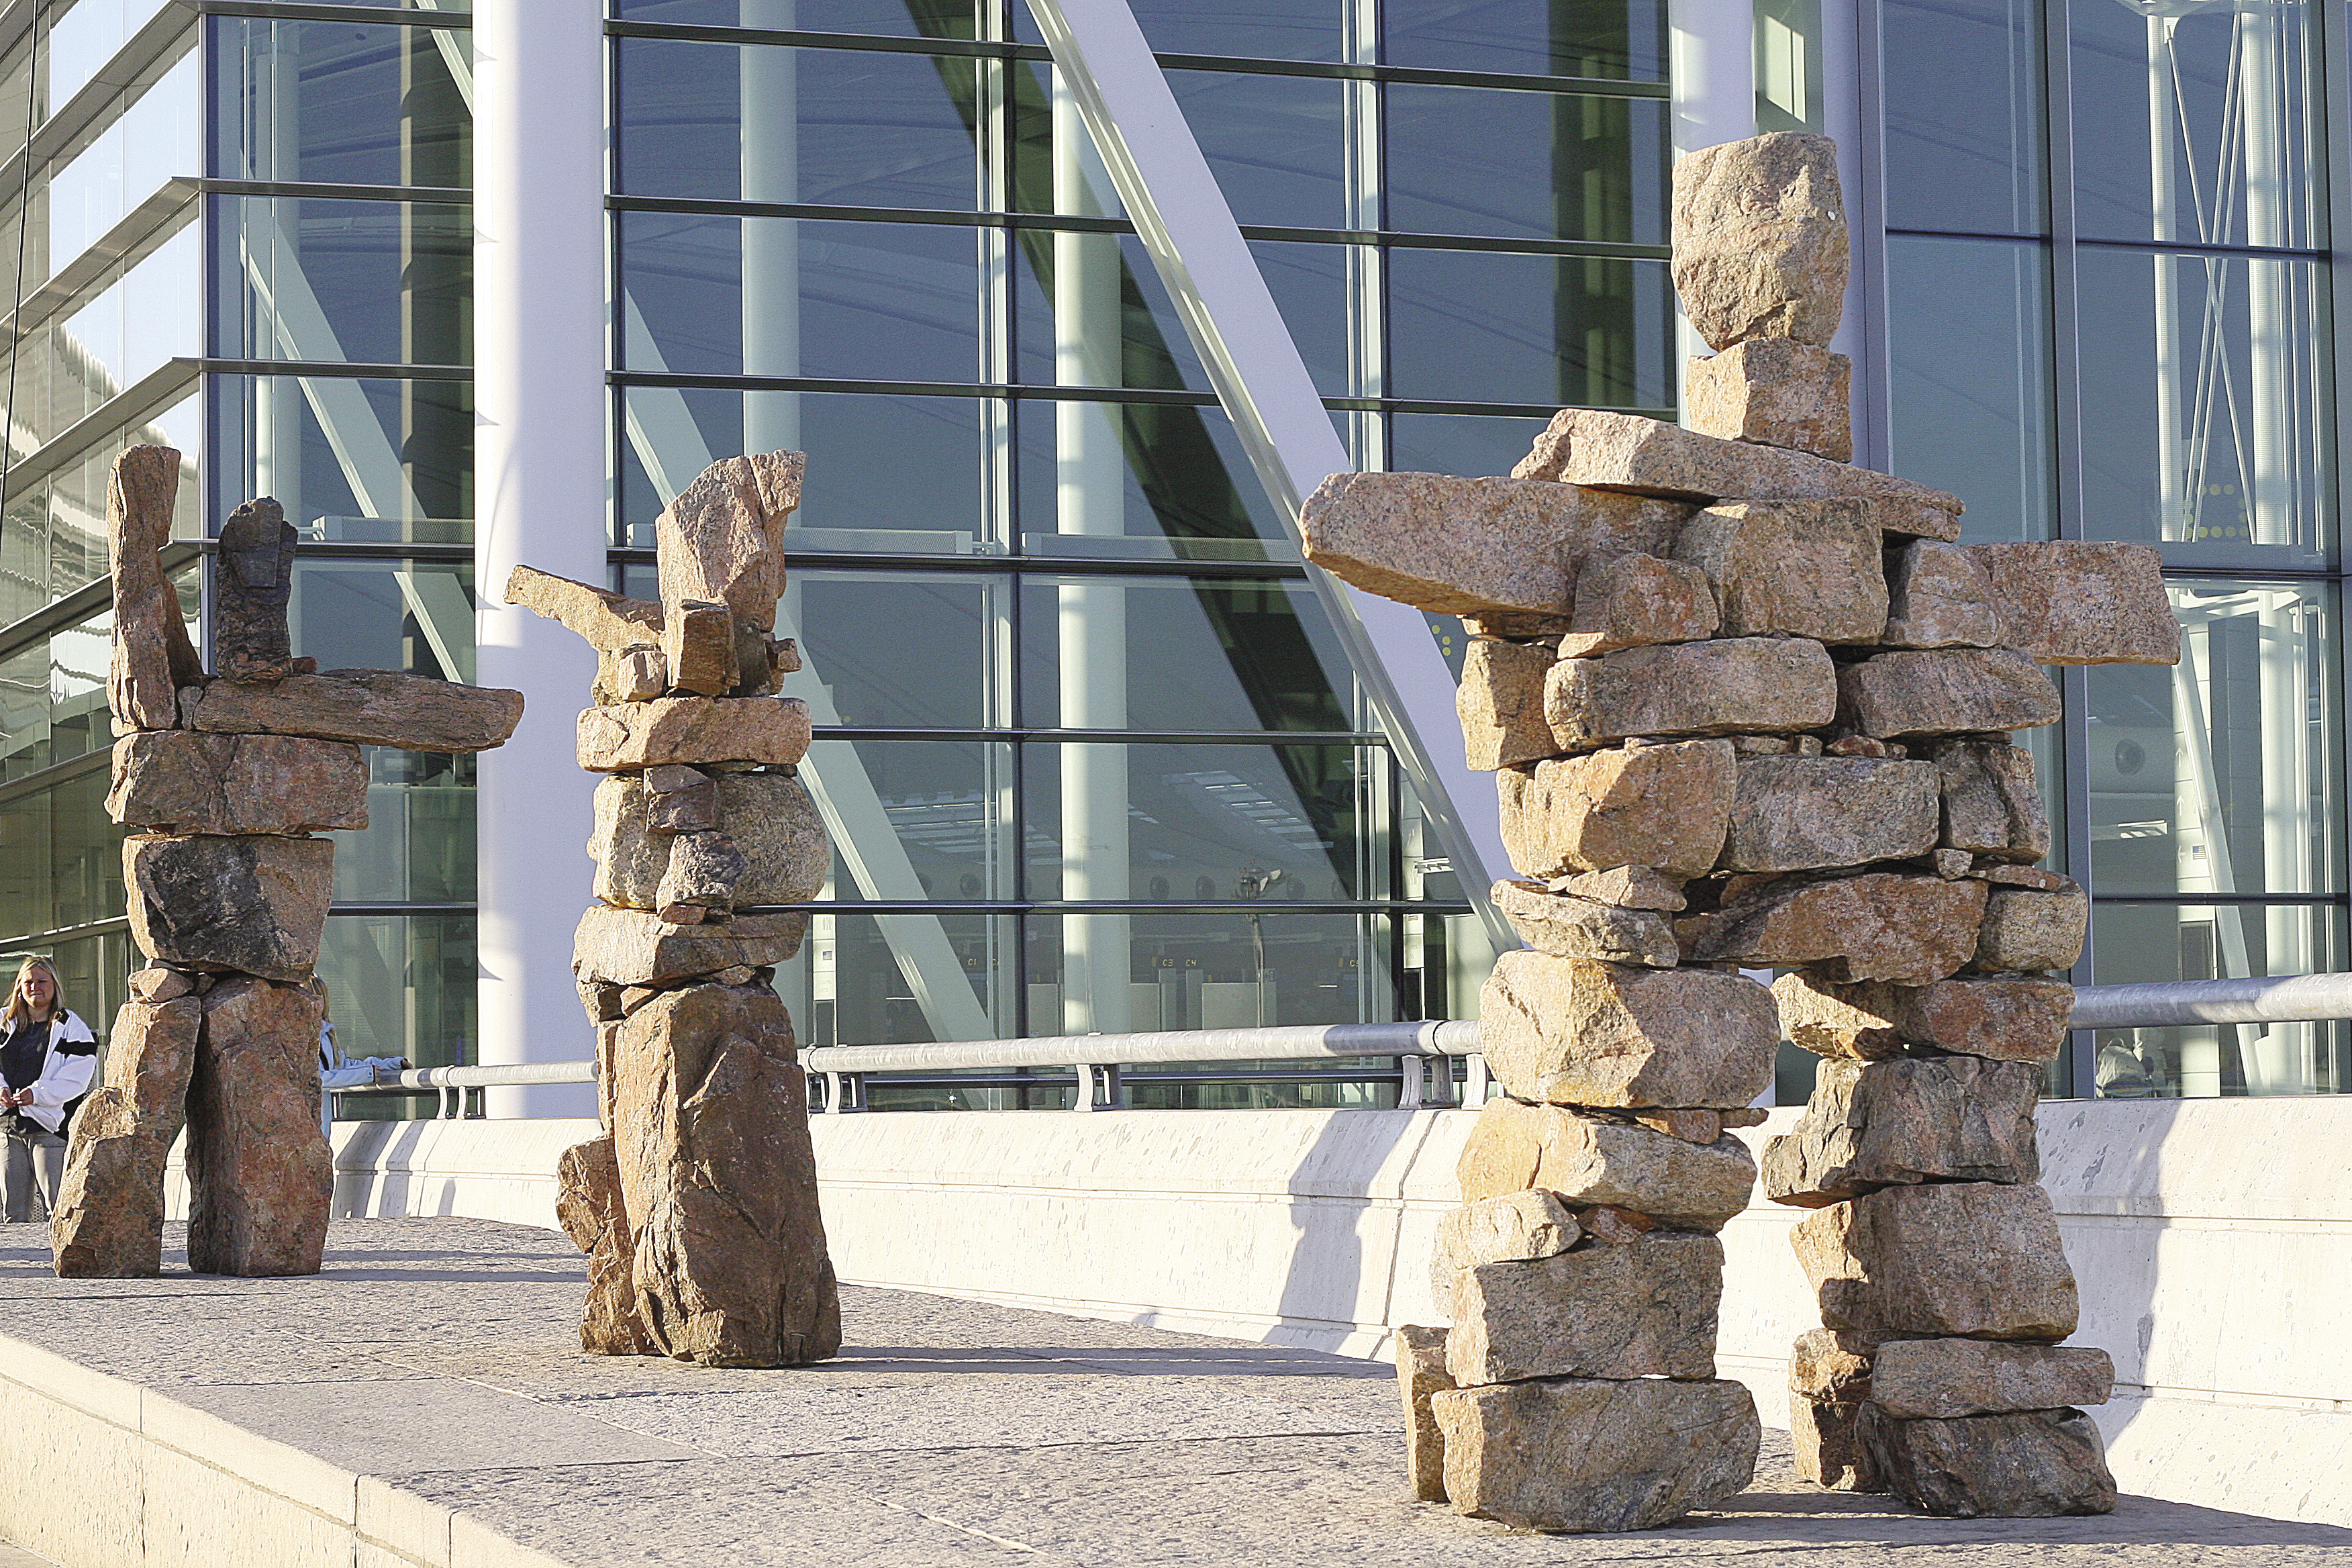 These three whimsical Inuksuit made of stacked orange granite stones greet passengers at the departure entrance at Terminal 1 of Toronto's Pearson International Airport.